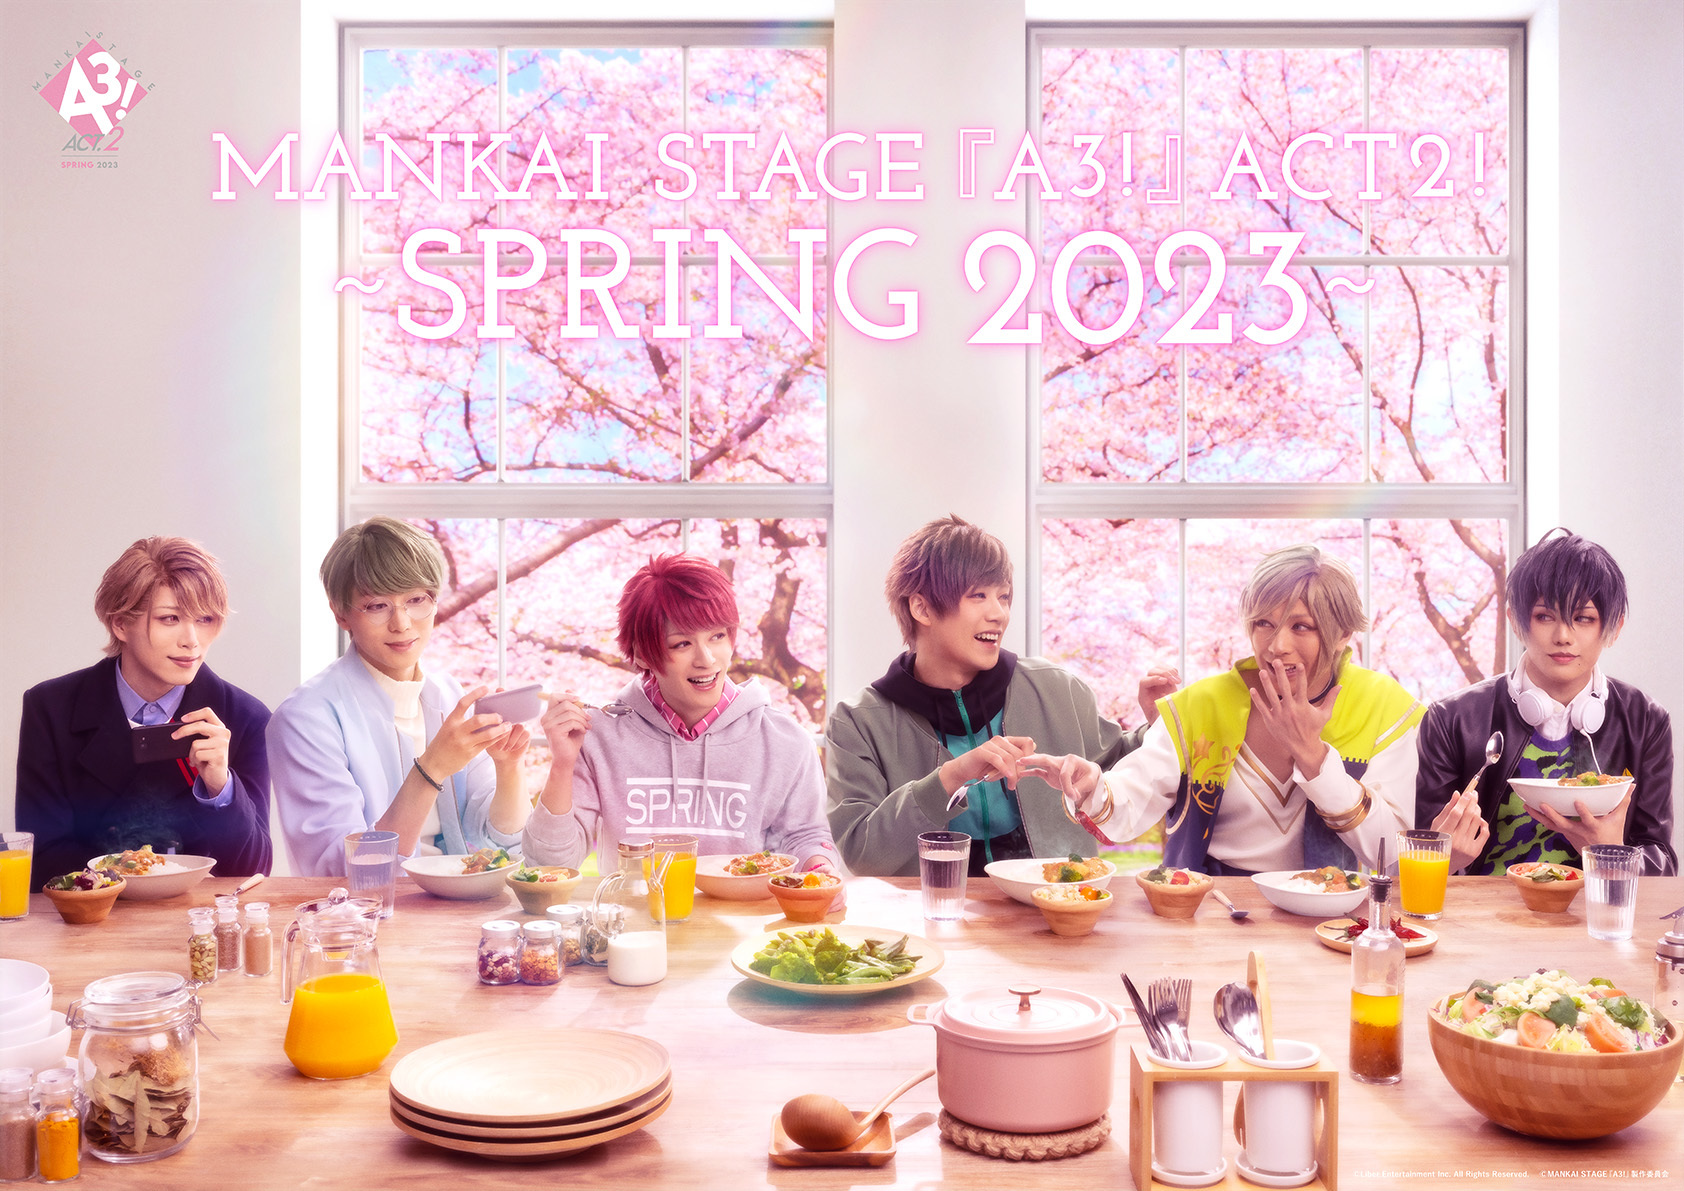 MANKAI STAGE『A3!』ACT2! ～SPRING 2023～ 　　(C)Liber Entertainment Inc. All Rights Reserved. (C)MANKAI STAGE『A3!』製作委員会　